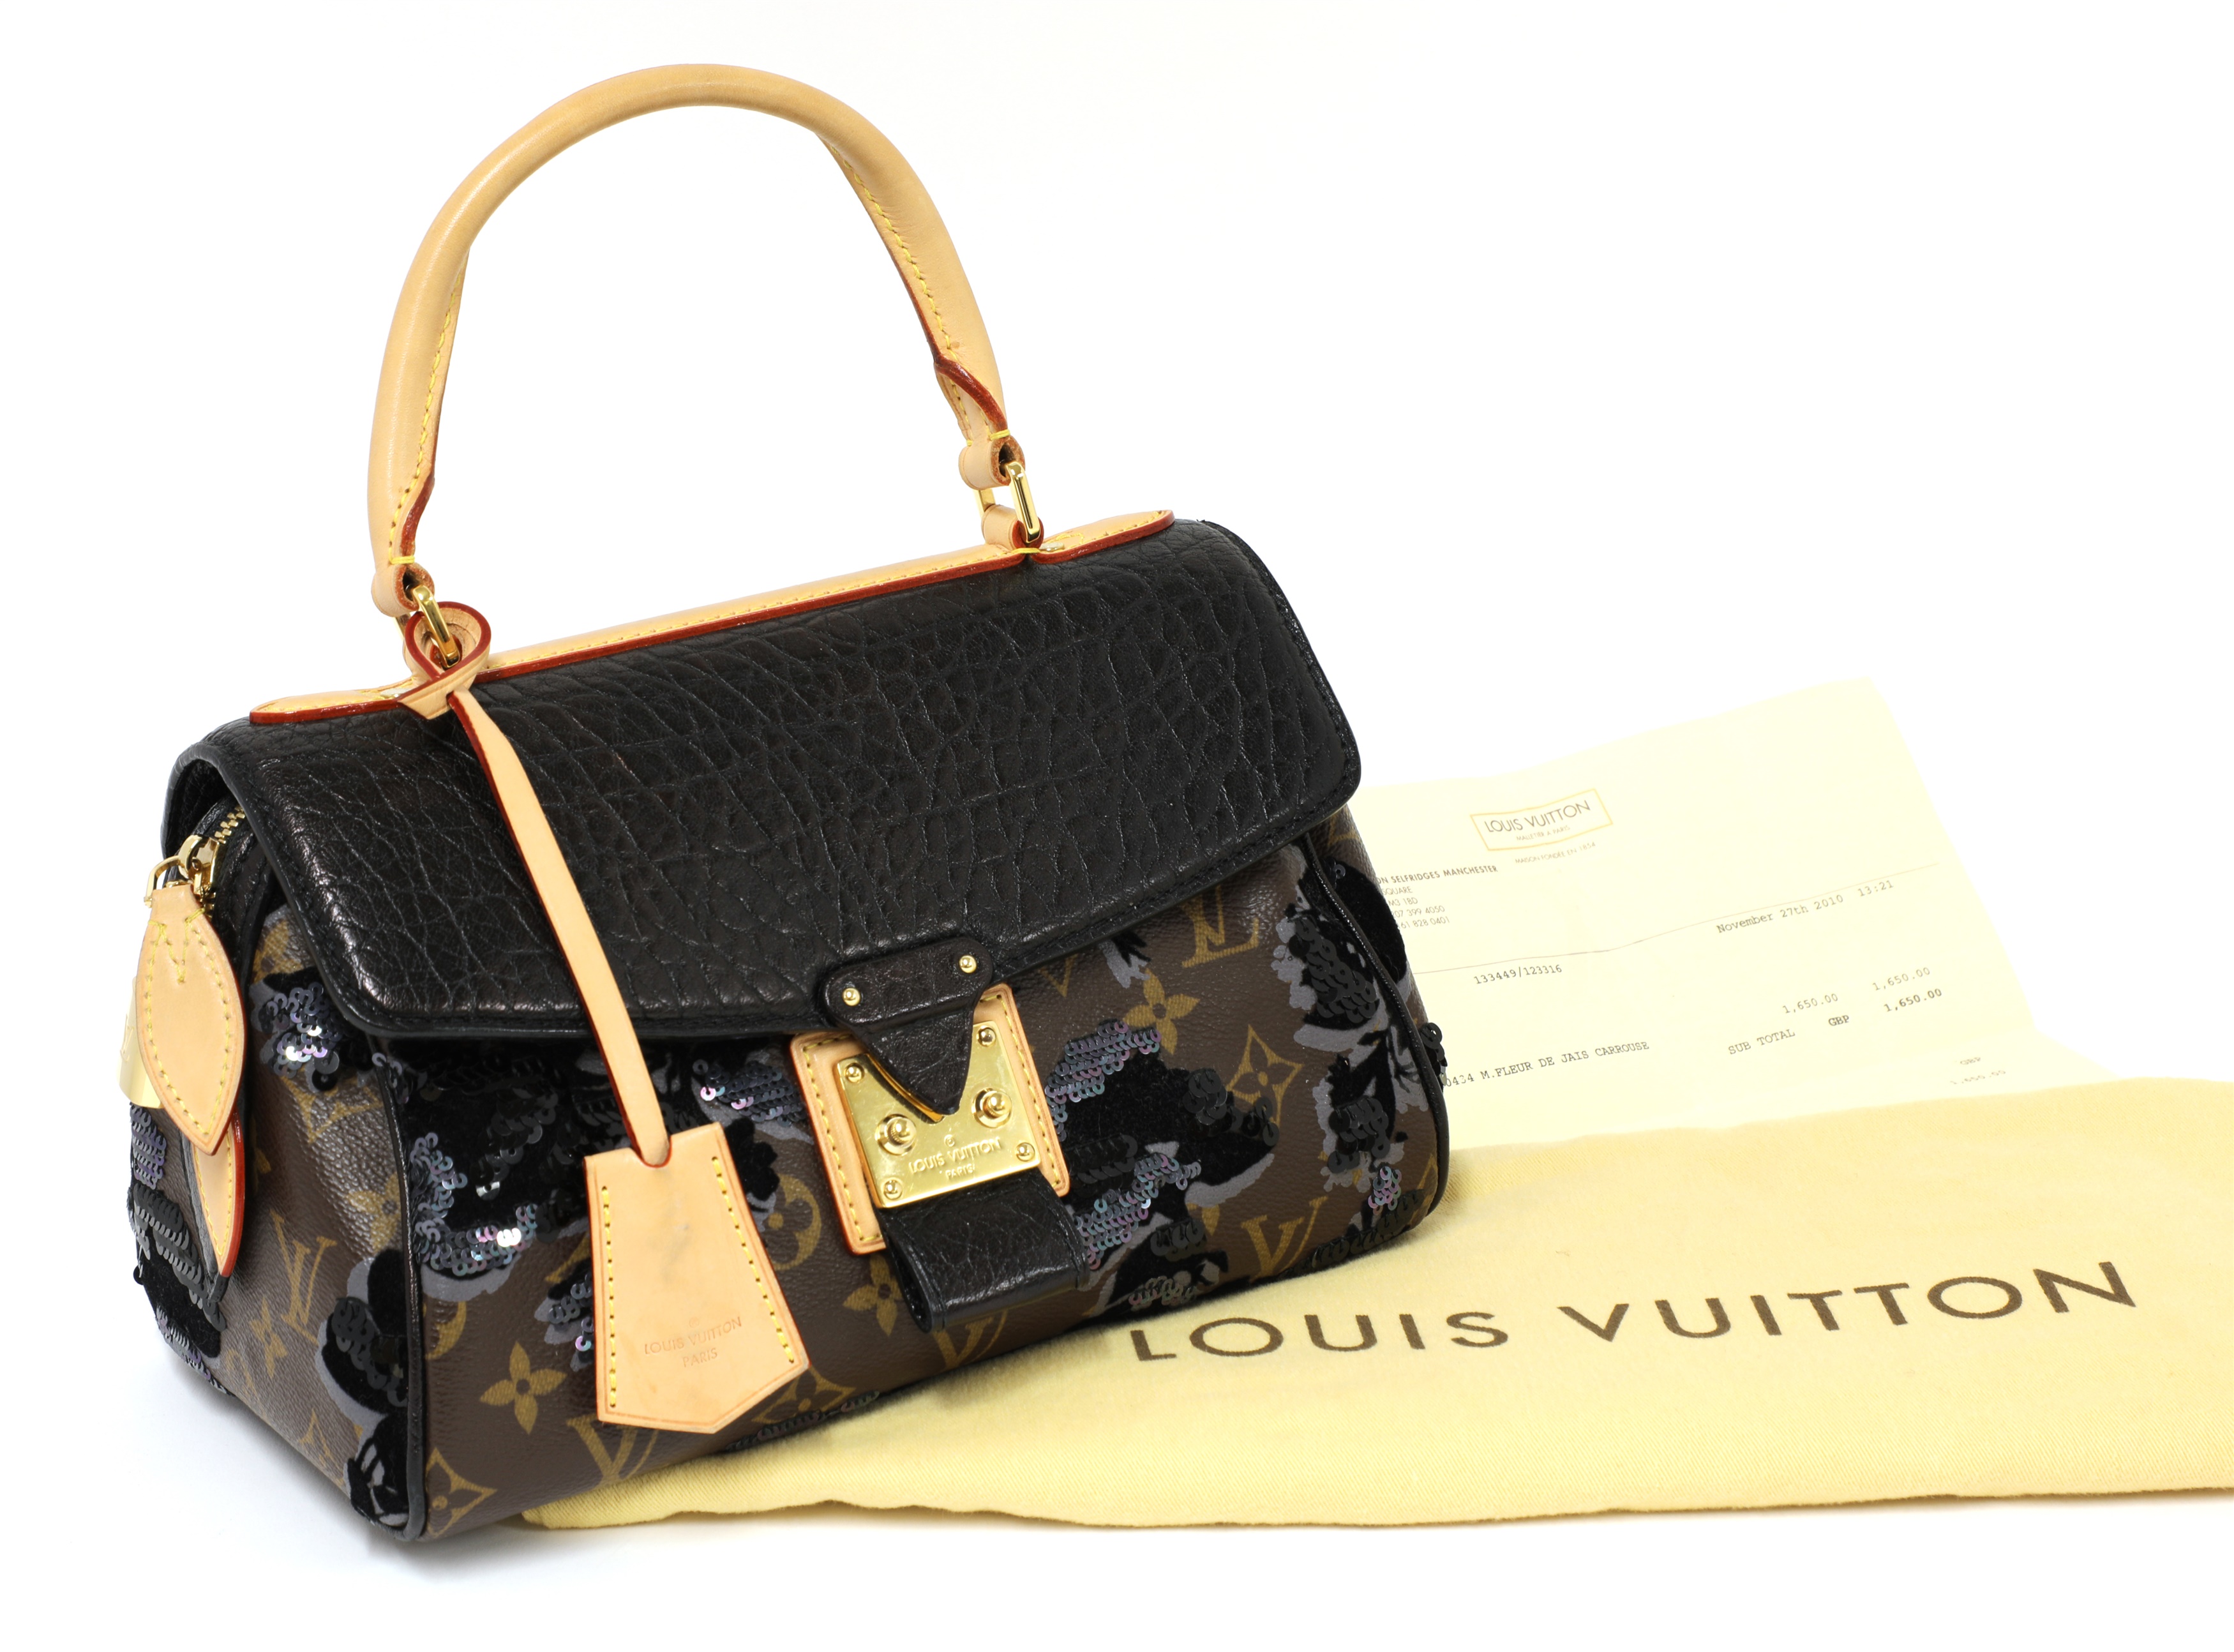 Sold at Auction: LOUIS VUITTON special edition bag